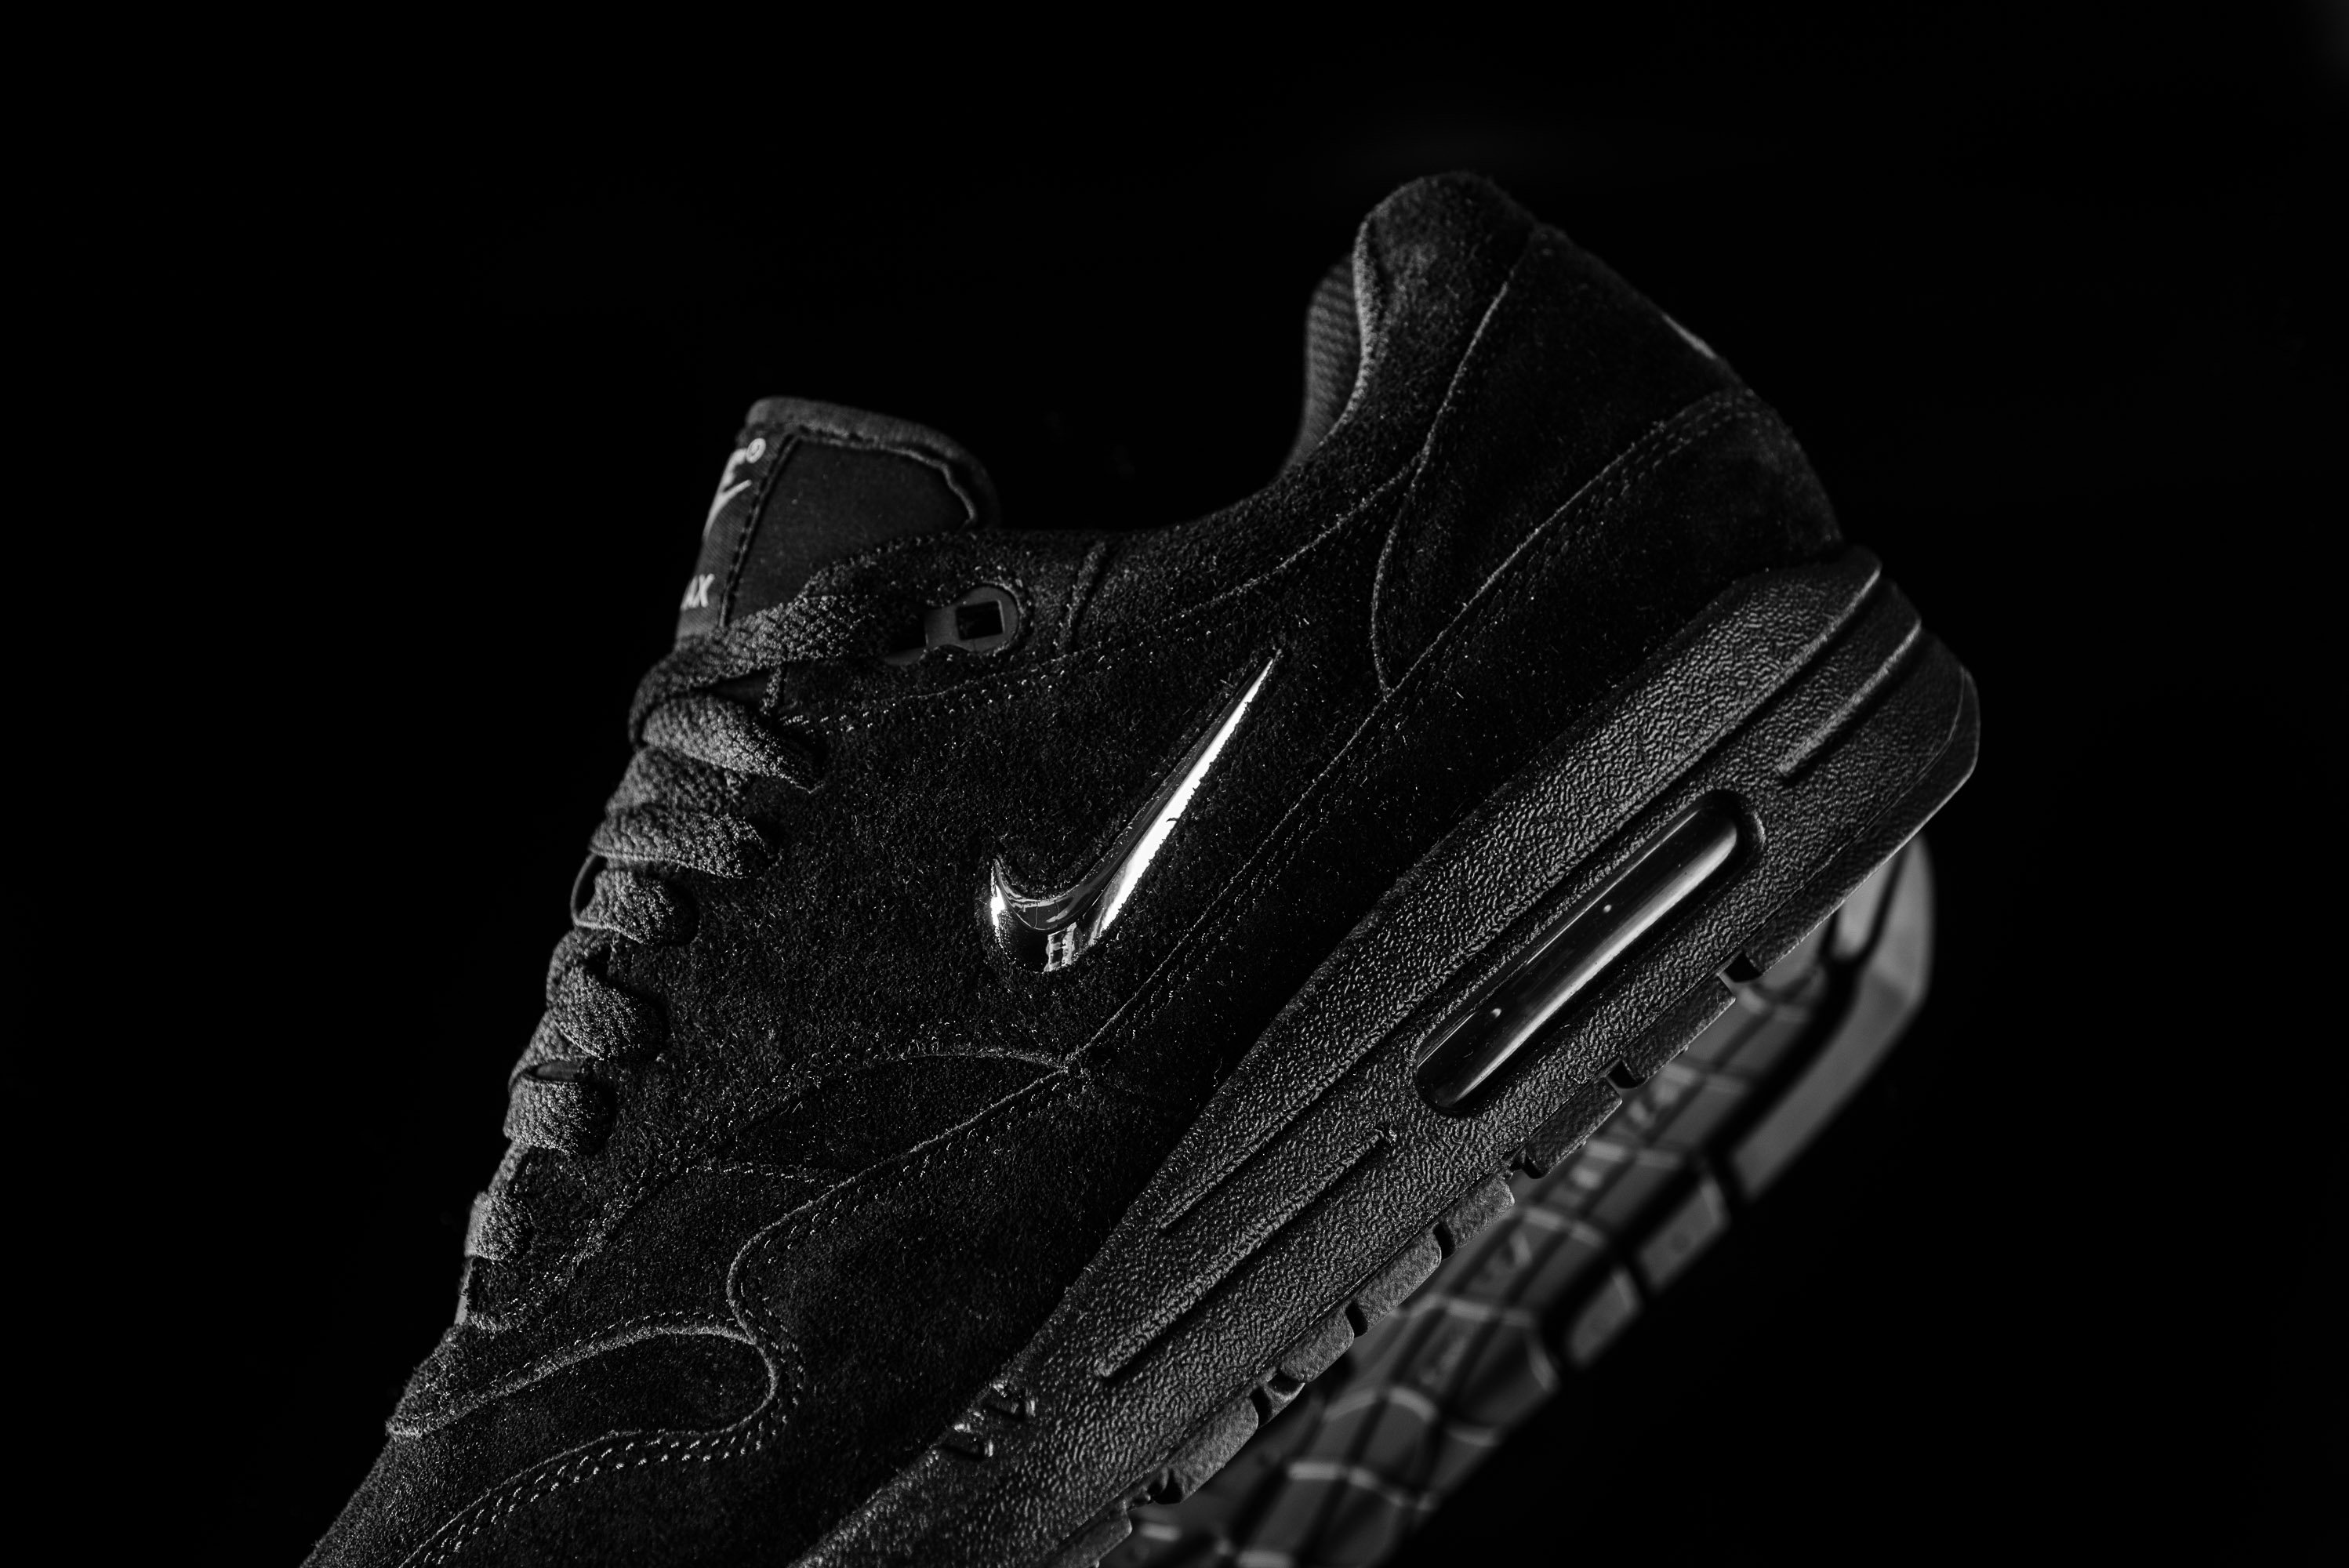 Nike Air Max 1 SC Jewel Black/Chrome // Available Now